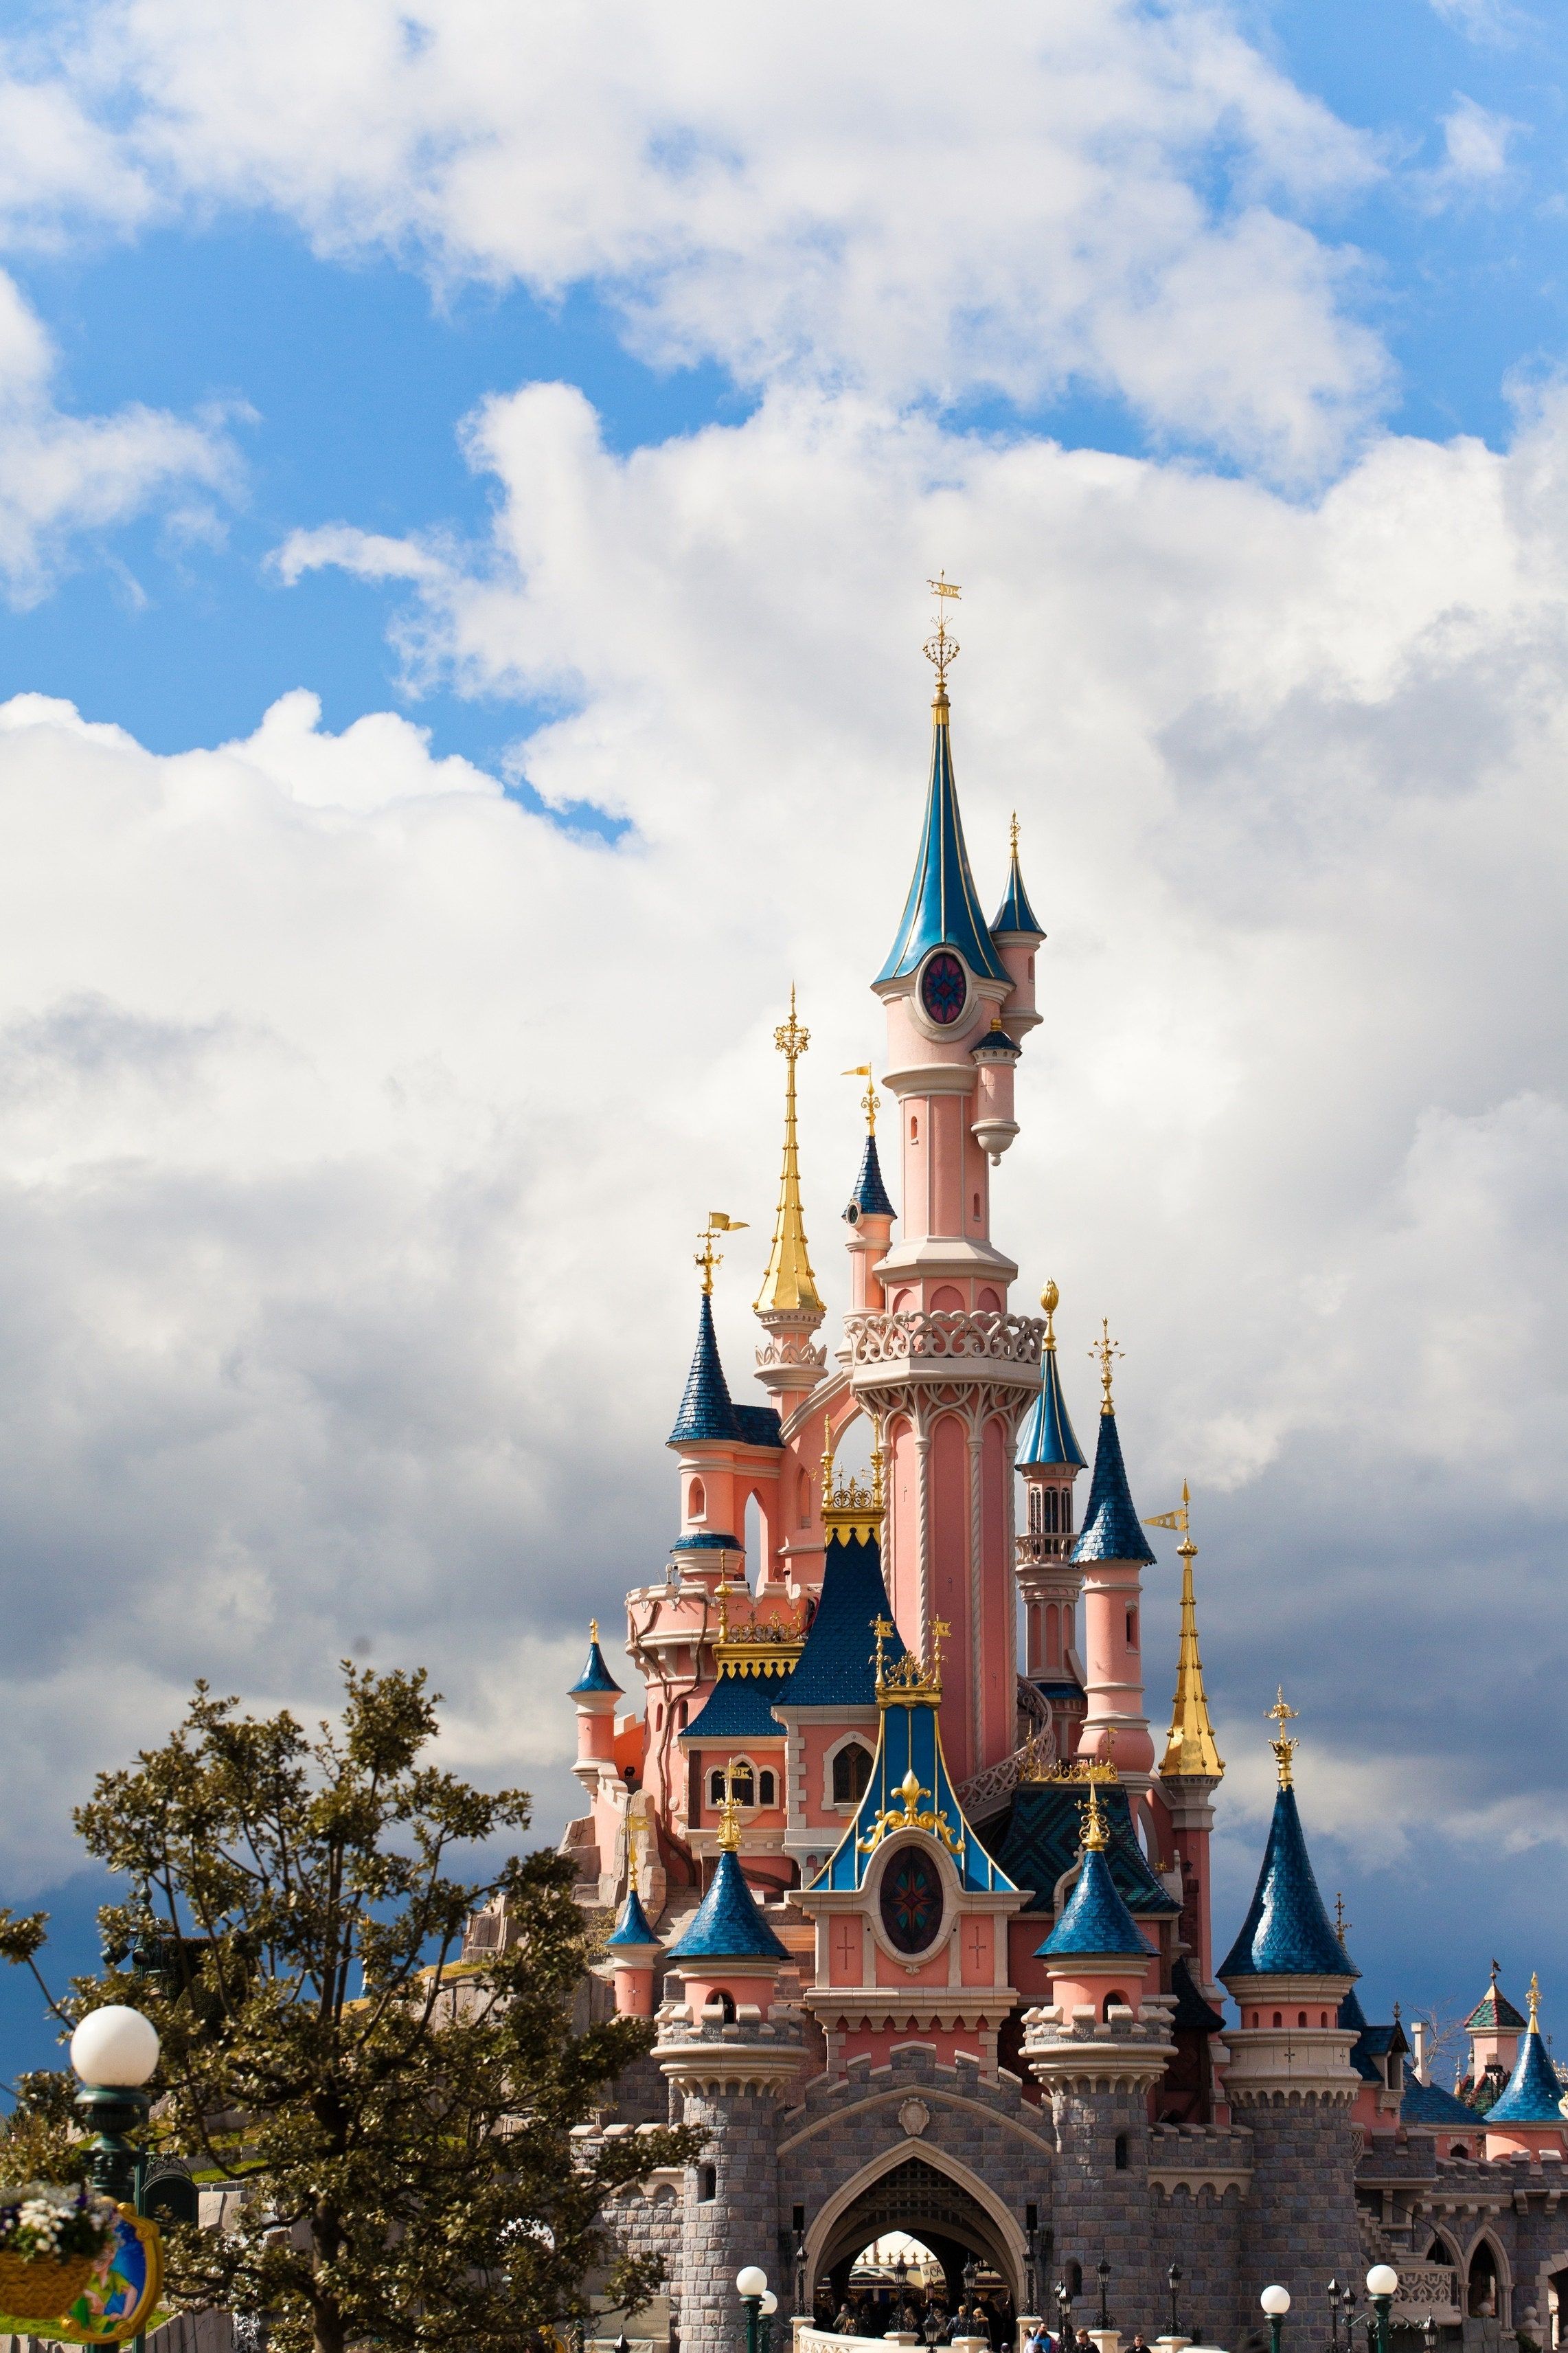 A pink castle with blue and gold spires stands in front of a blue sky with white clouds. - Disneyland